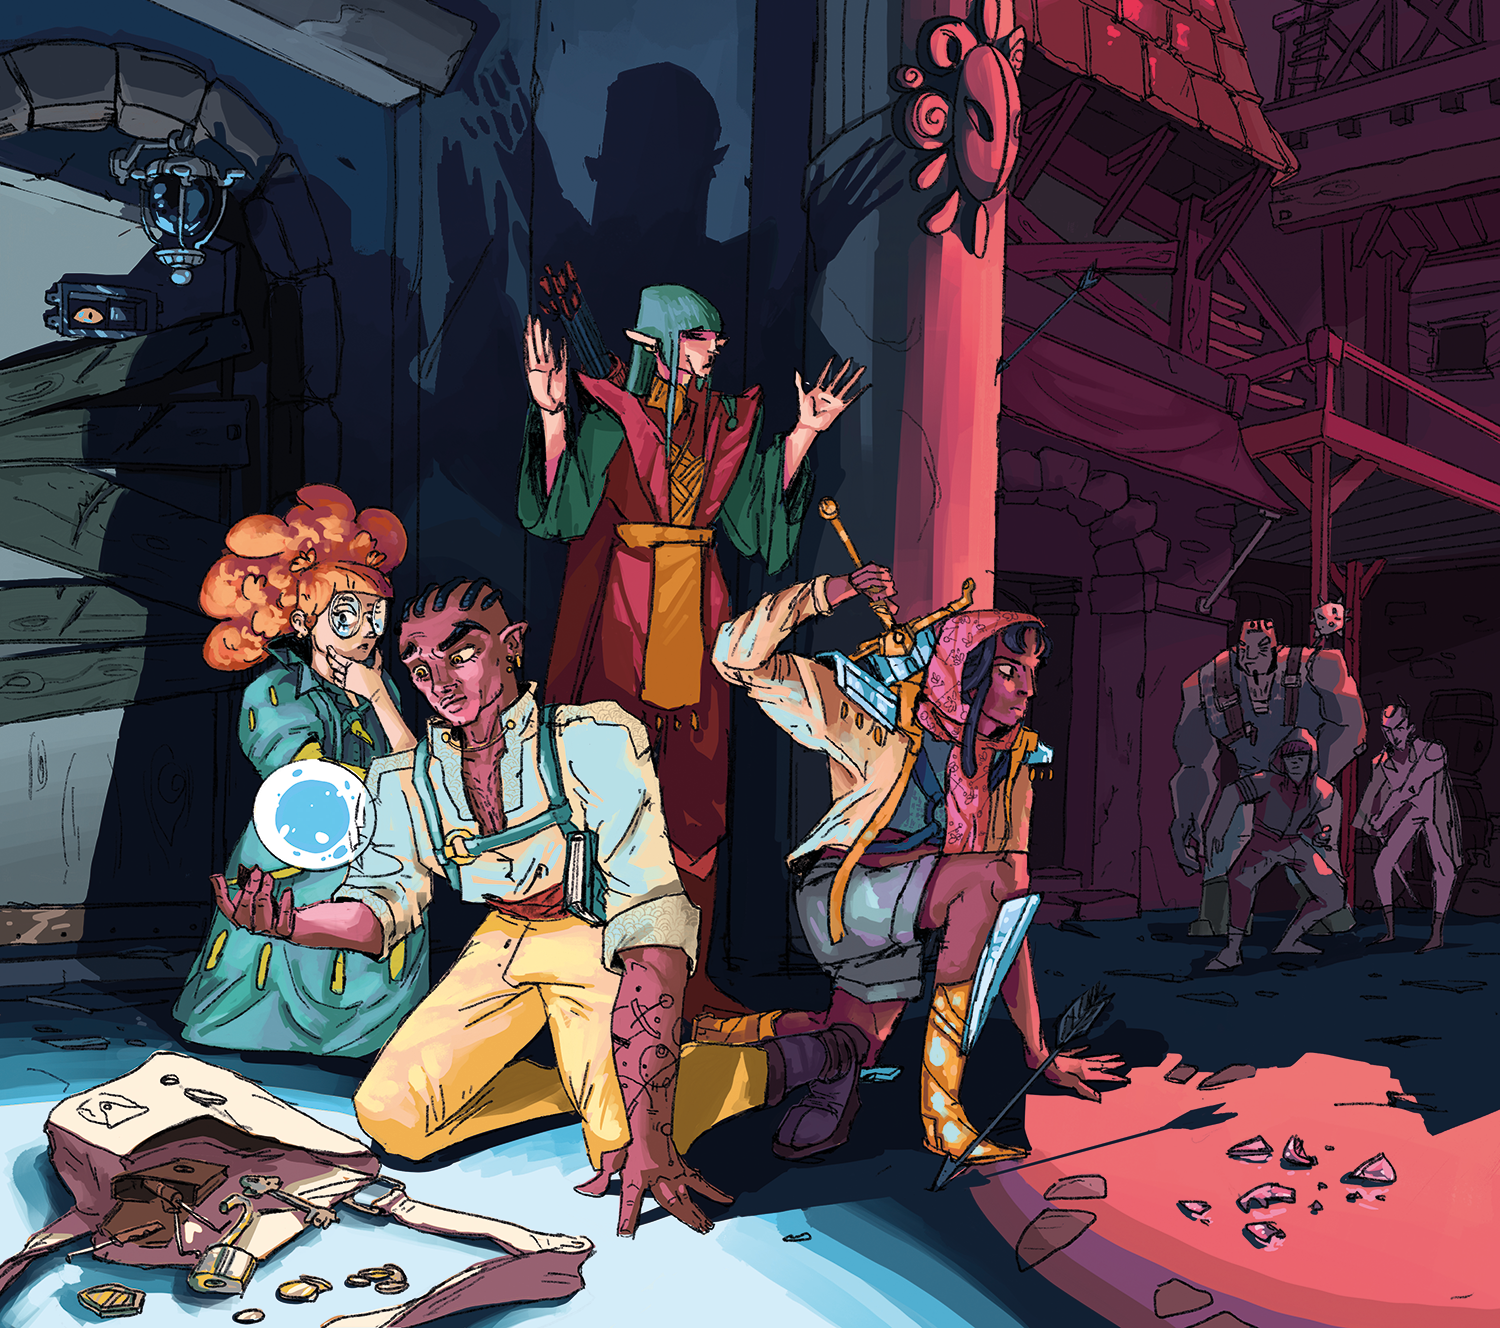 Image. A group of fantasy adventurers investigate a bag in an alleyway, while thugs approach from nearby shadows.